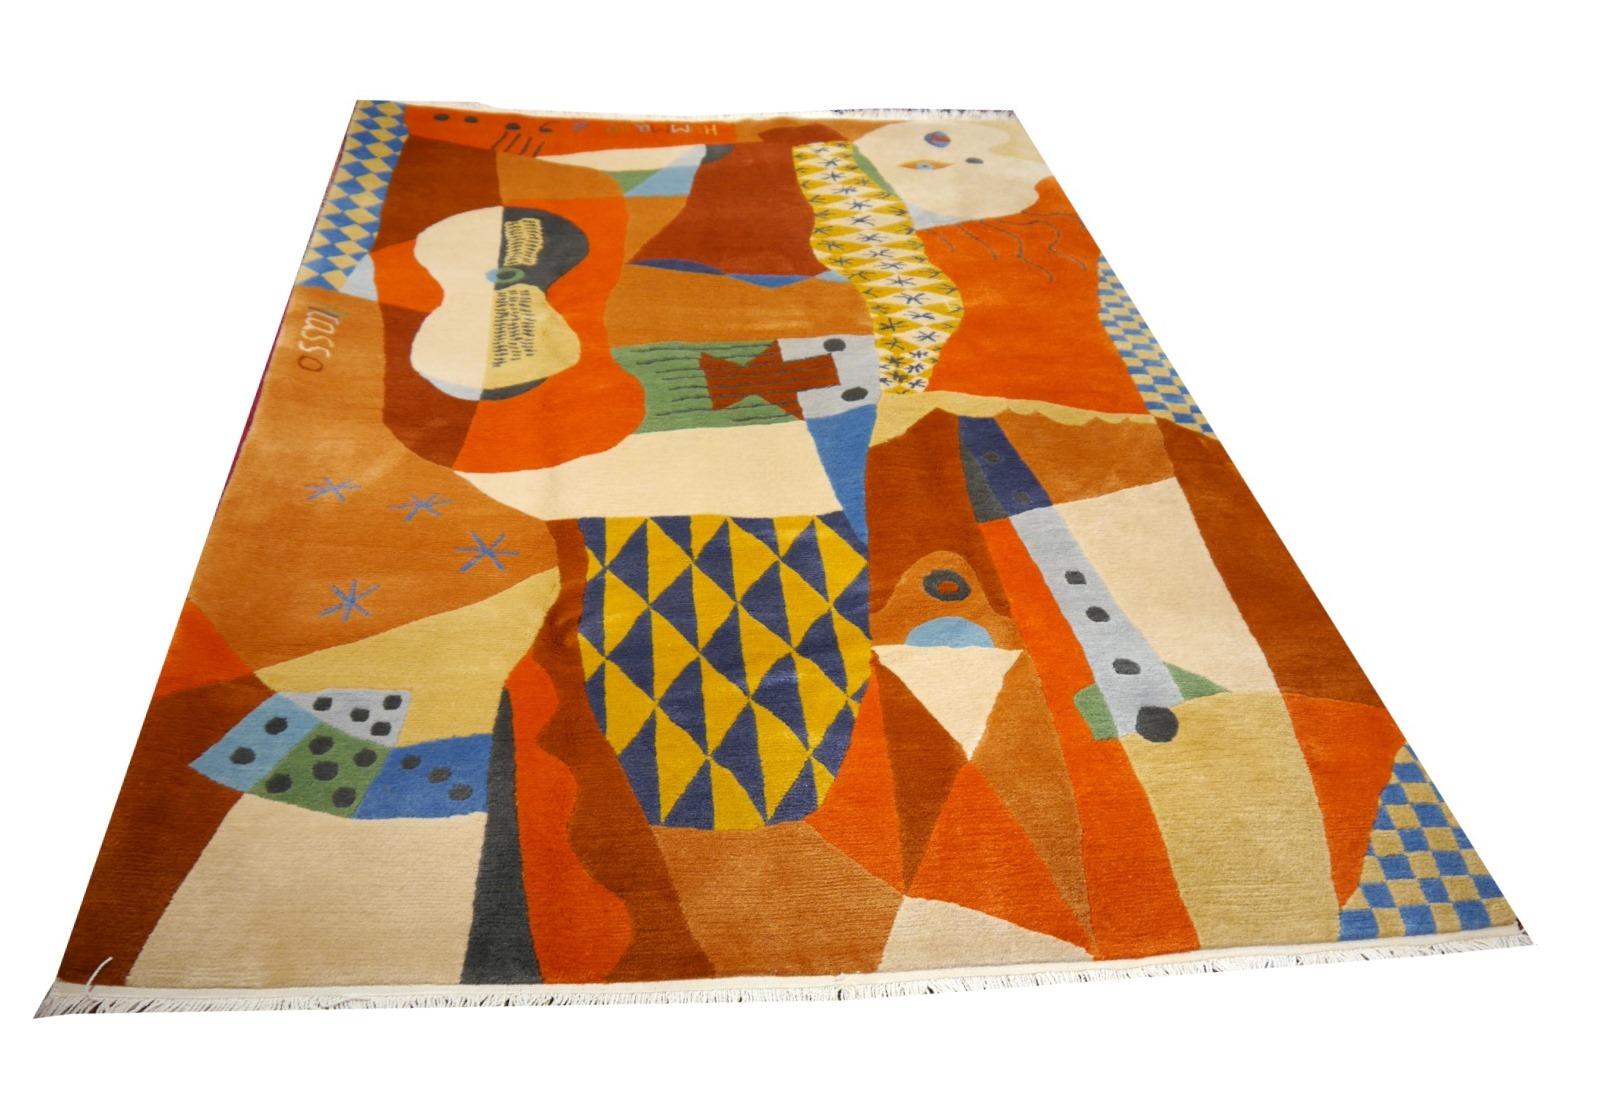 A beautiful vintage design carpet by ART LINE, hand knotted using finest Tibetan wool in 6.6 x 9.6 ft / 300 x 200 cm, Design after Pablo Picasso

Cubism is a style in art history that developed from the avant-garde in painting in France around